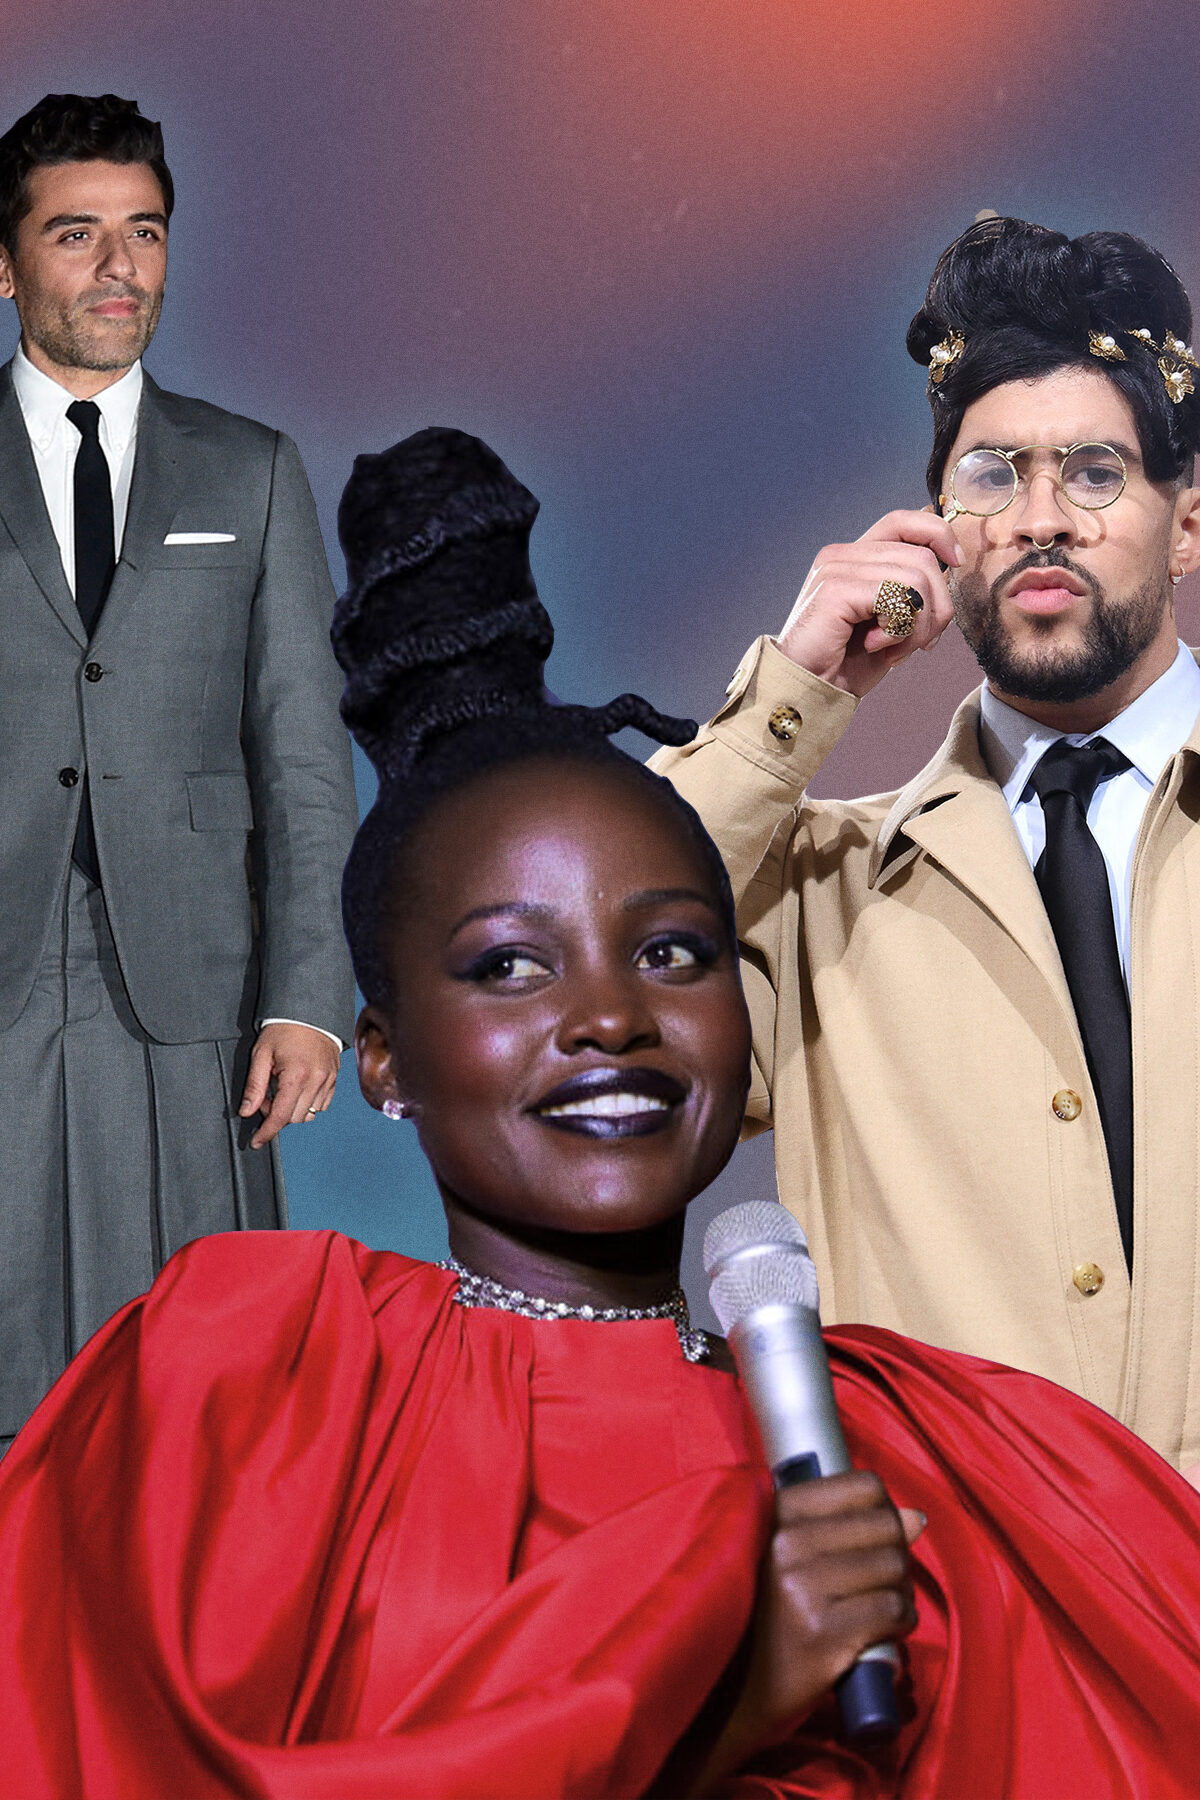 Oscar Isaac, Lupita Nyong'o, and Bad Bunny in the 10 Best Fashion Moments of 2022